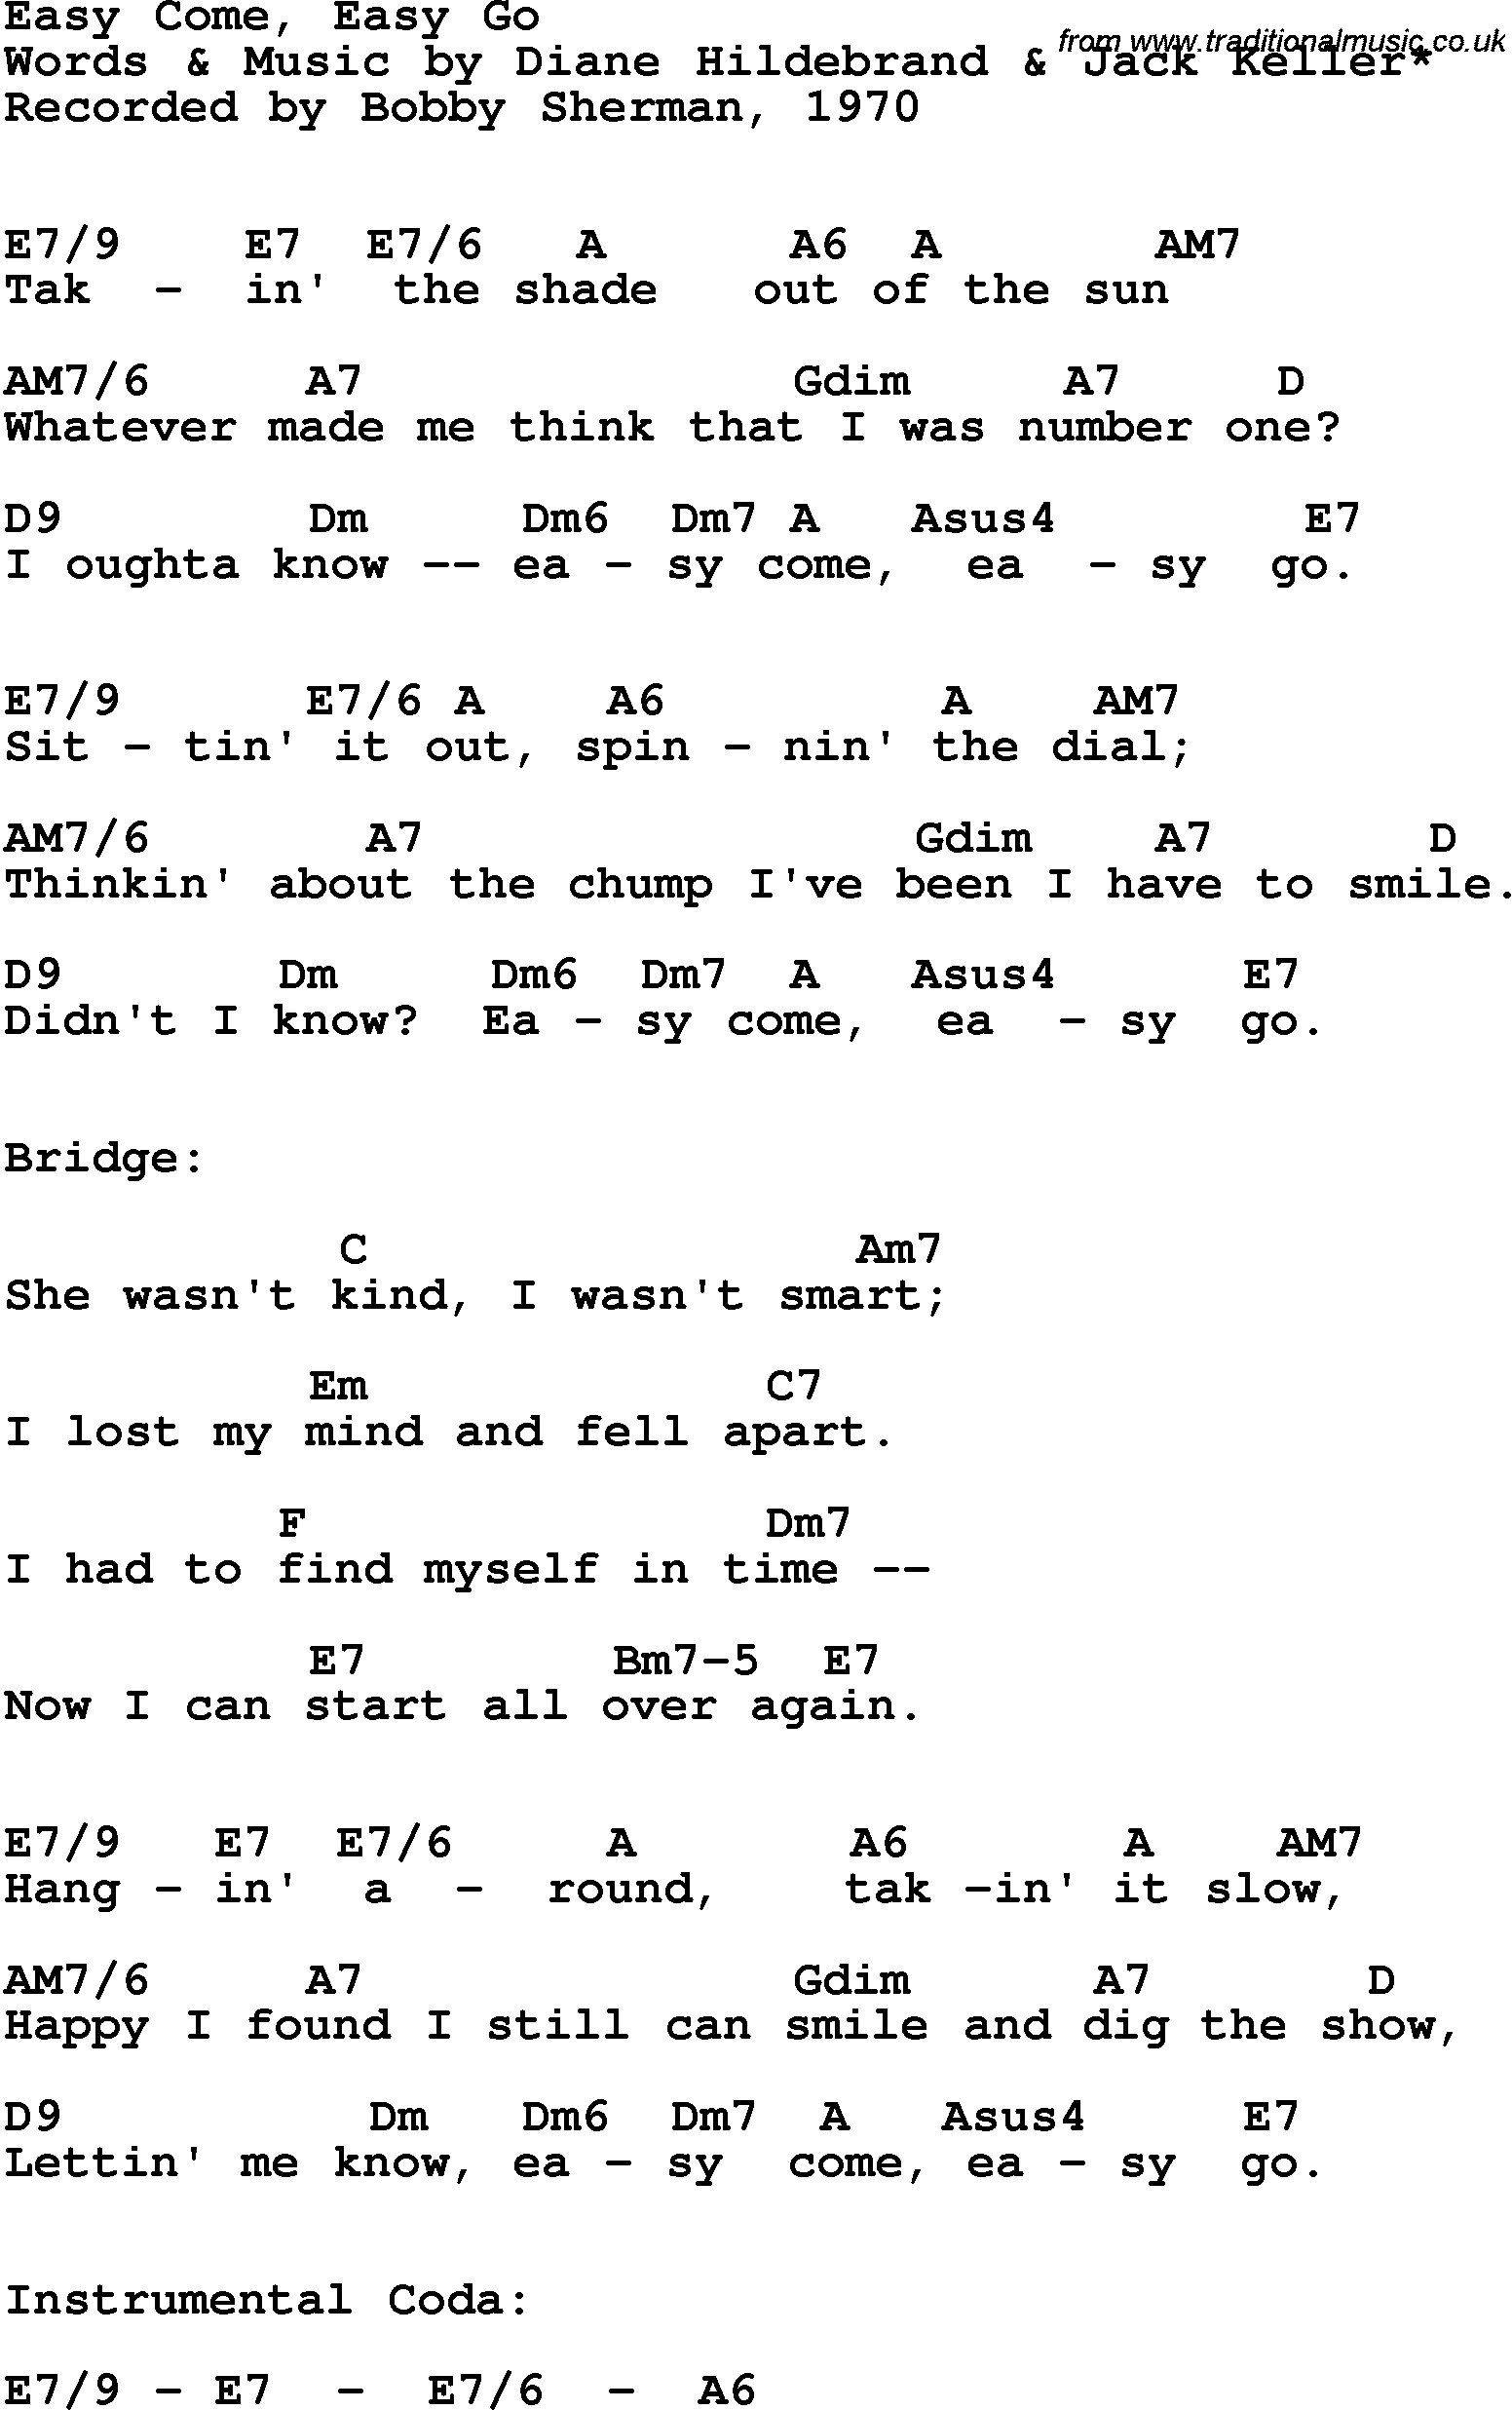 Song Lyrics with guitar chords for Easy Come, Easy Go - Bobby Sherman, 1970